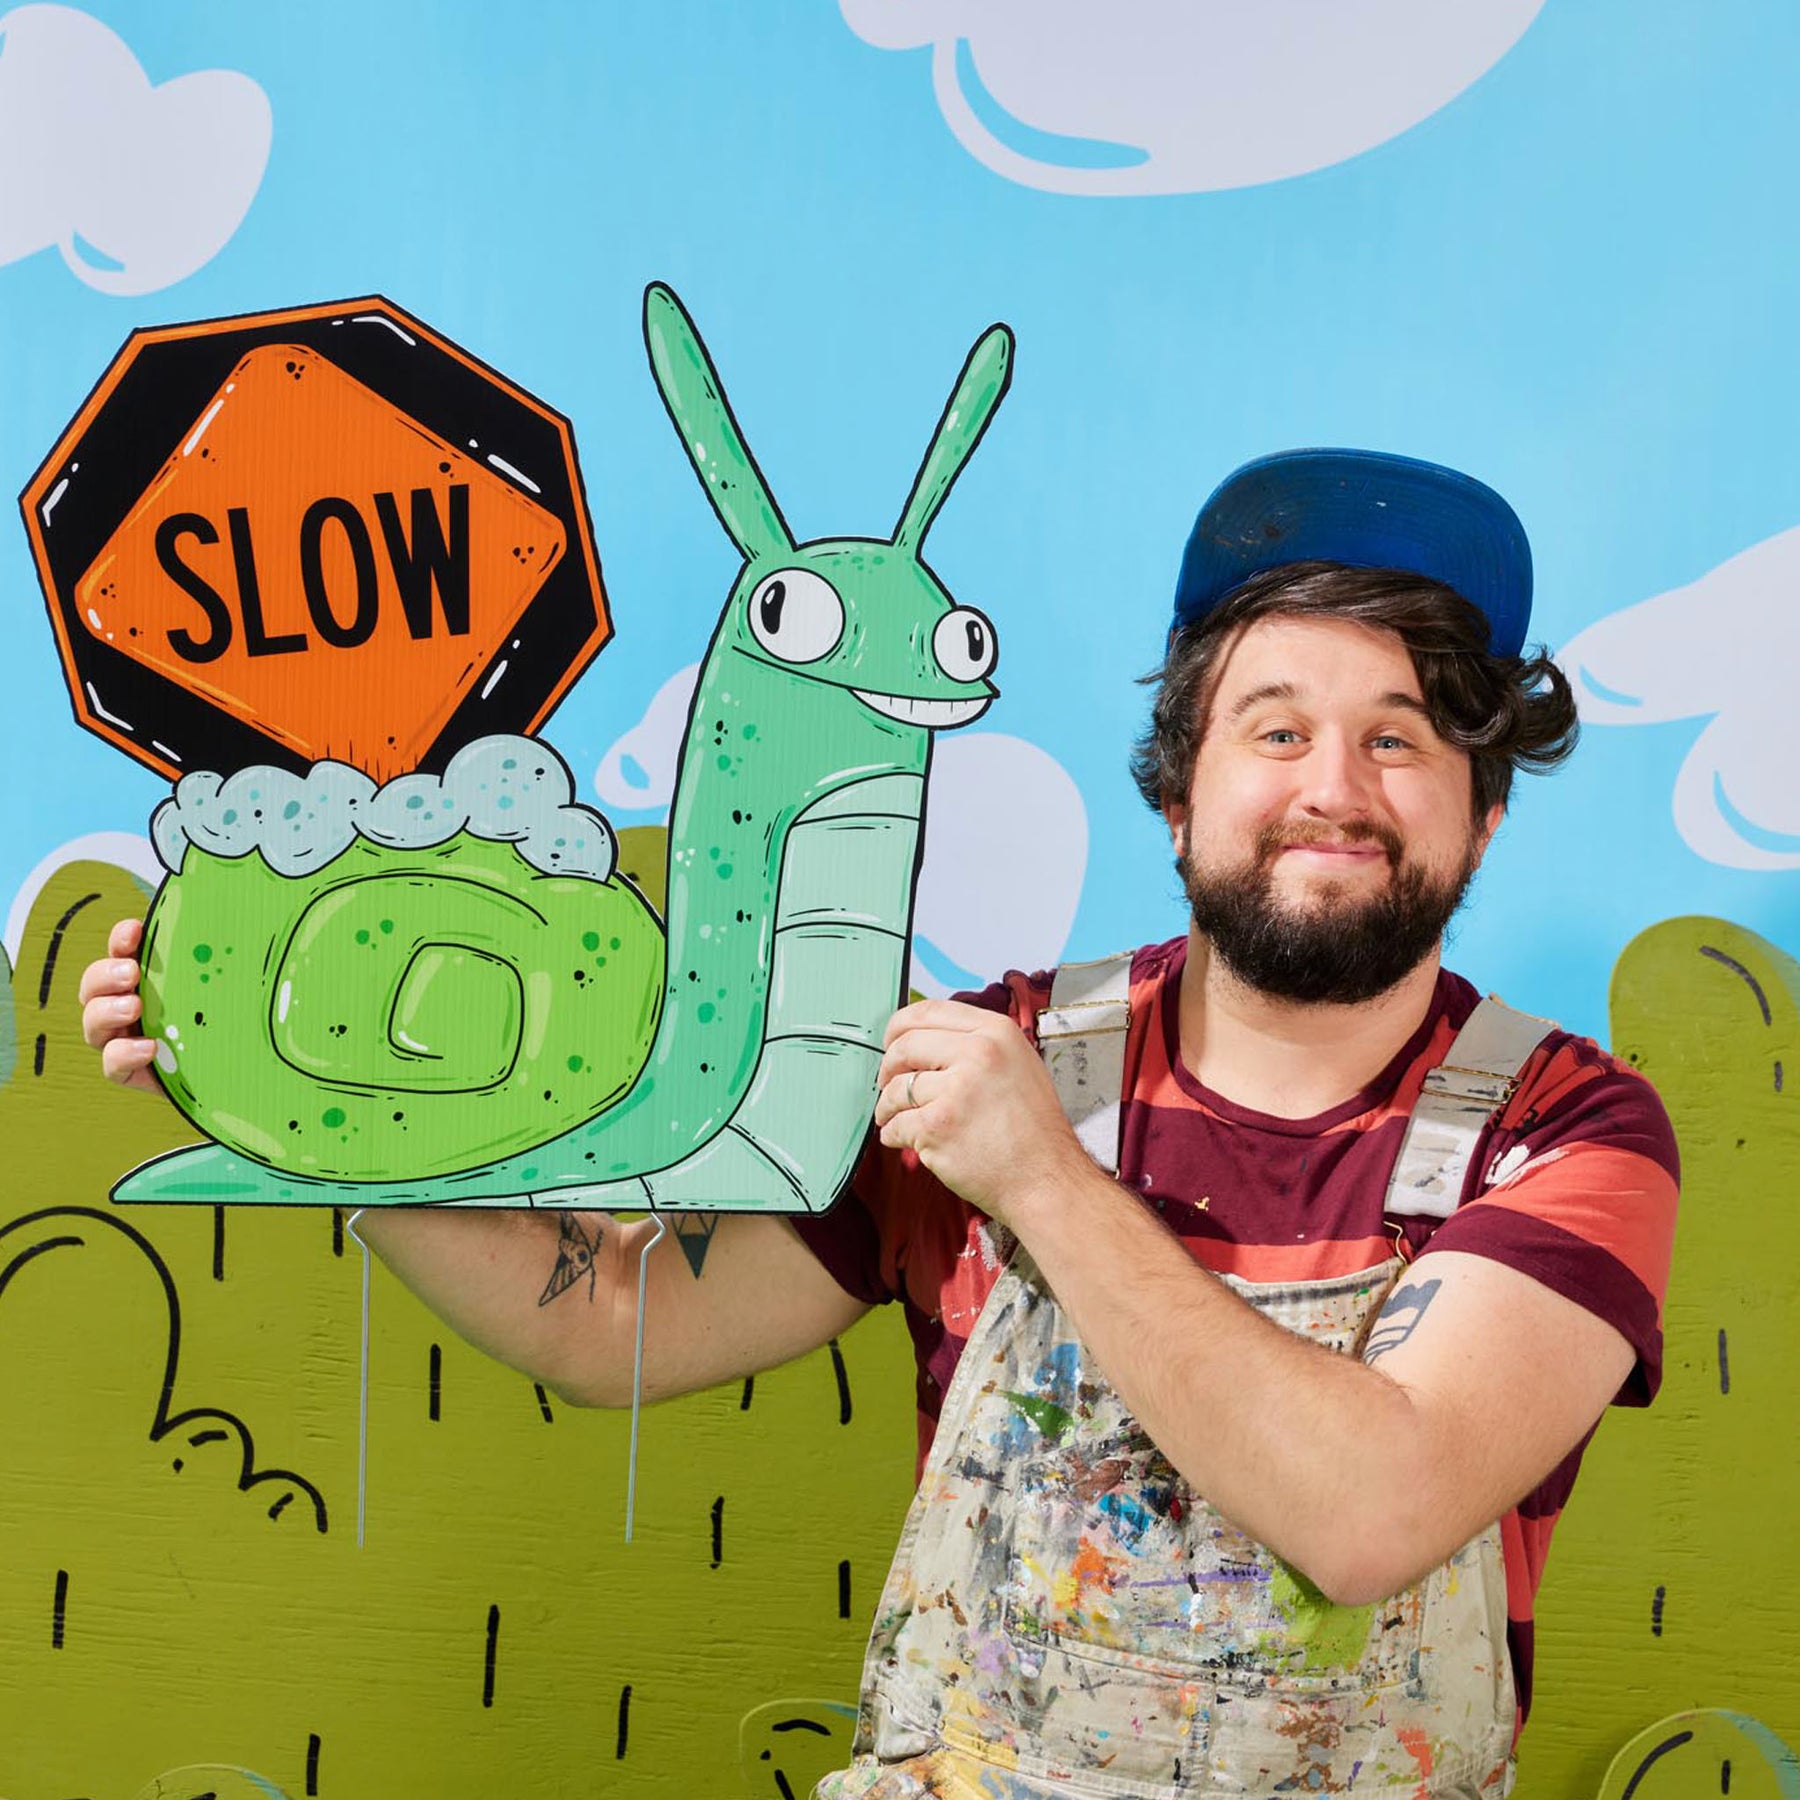 Sonny the Snail | "Slow" Yard Sign